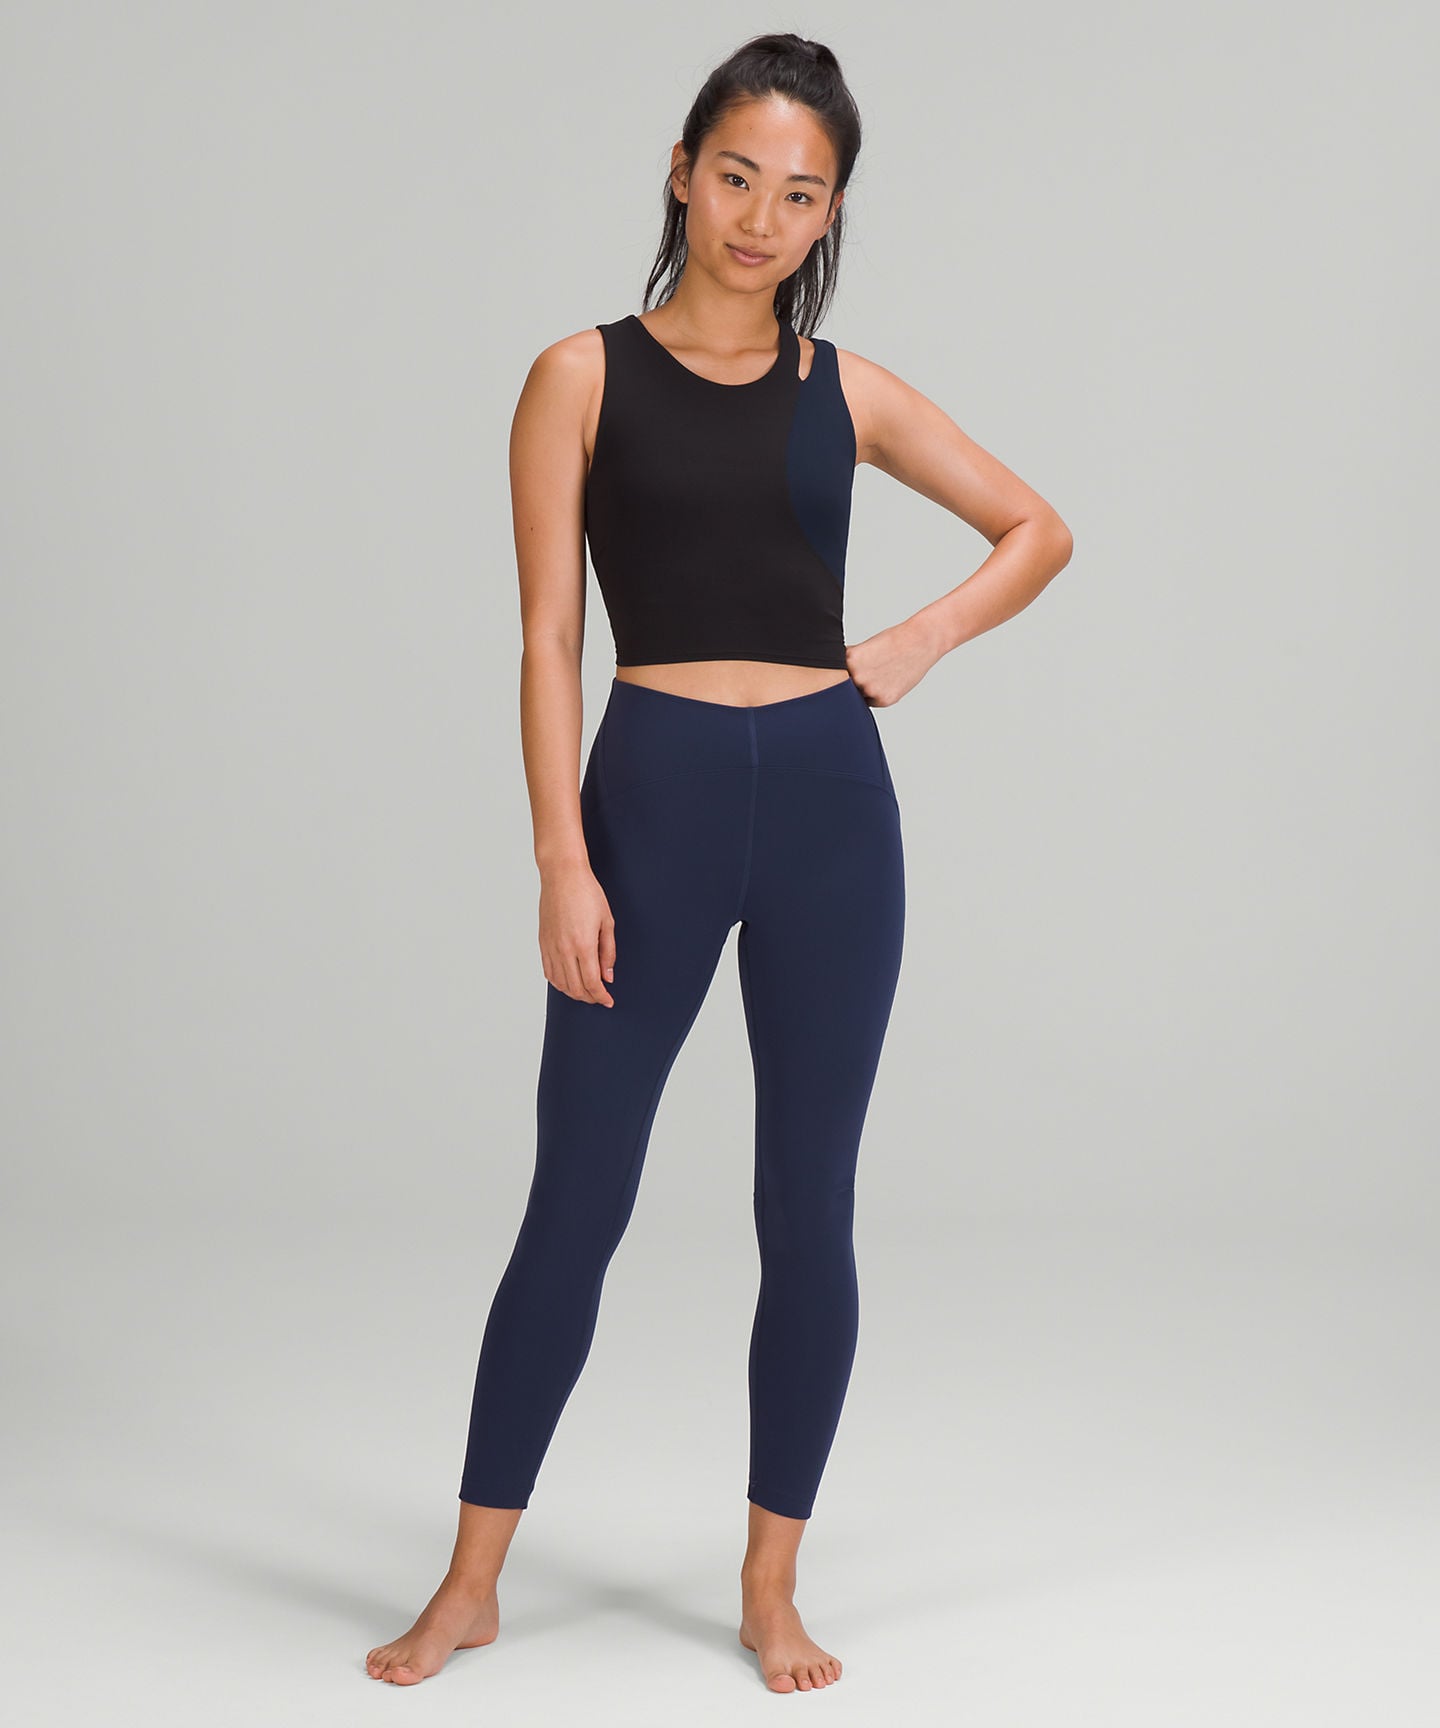 Lululemon's Newest Yoga Leggings: Lululemon InStill High-Rise Tight, Lululemon's Already Ready For 2022 With These 12 Cute New Workout Clothes